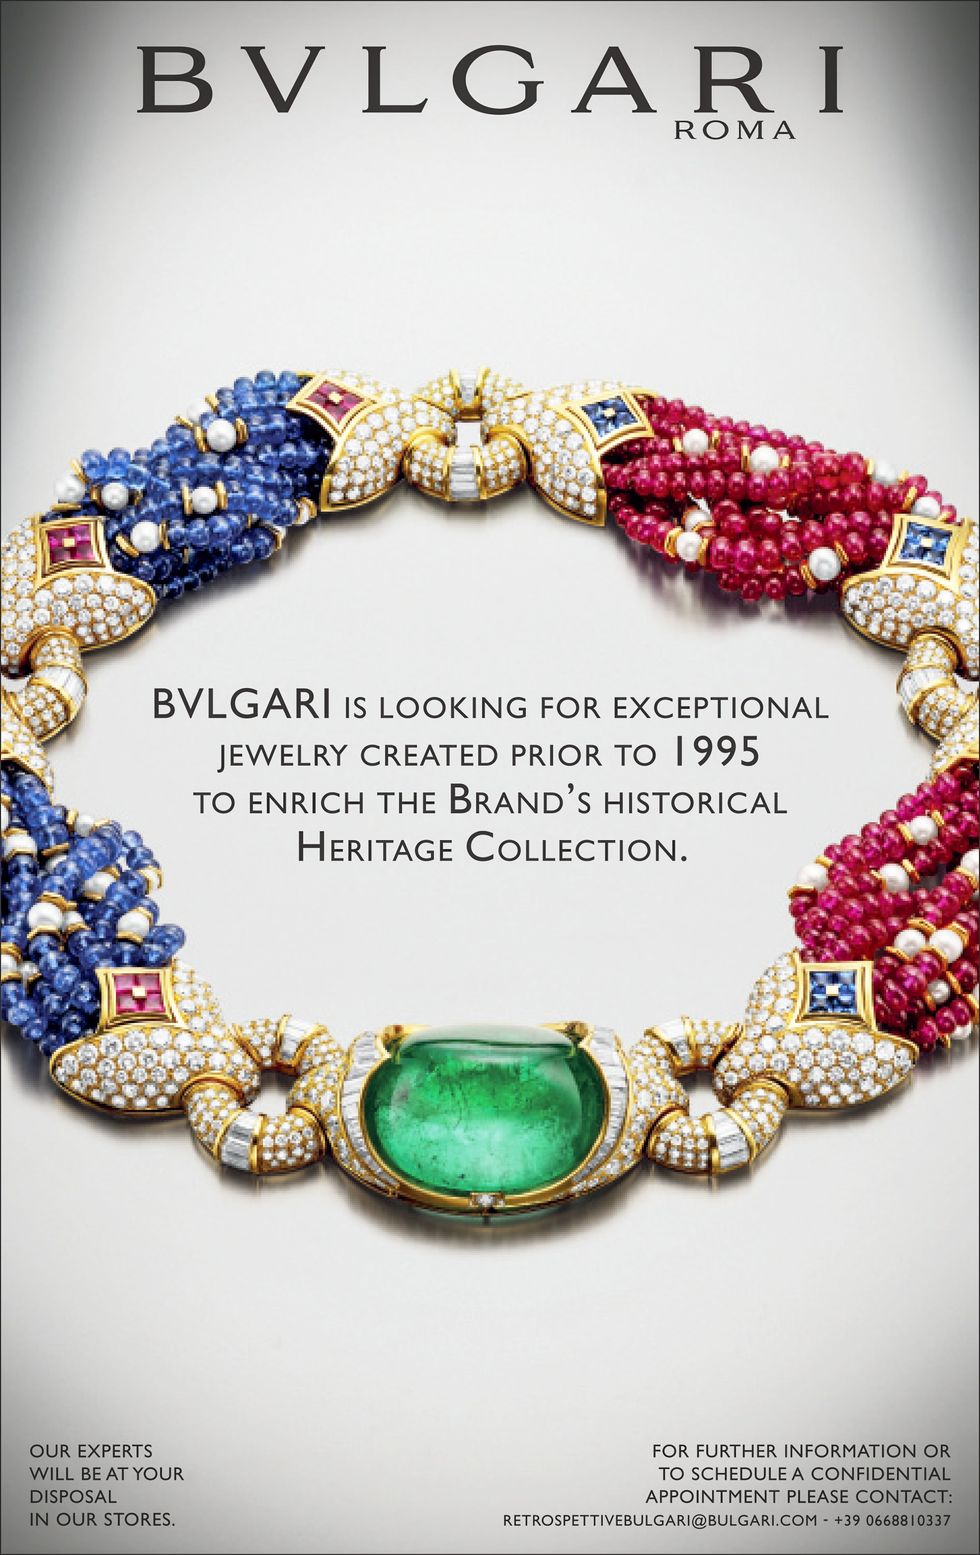 Bulgari Heritage Collection - The Italian Jewelry House Searches For Lost  Treasures For Its Archive